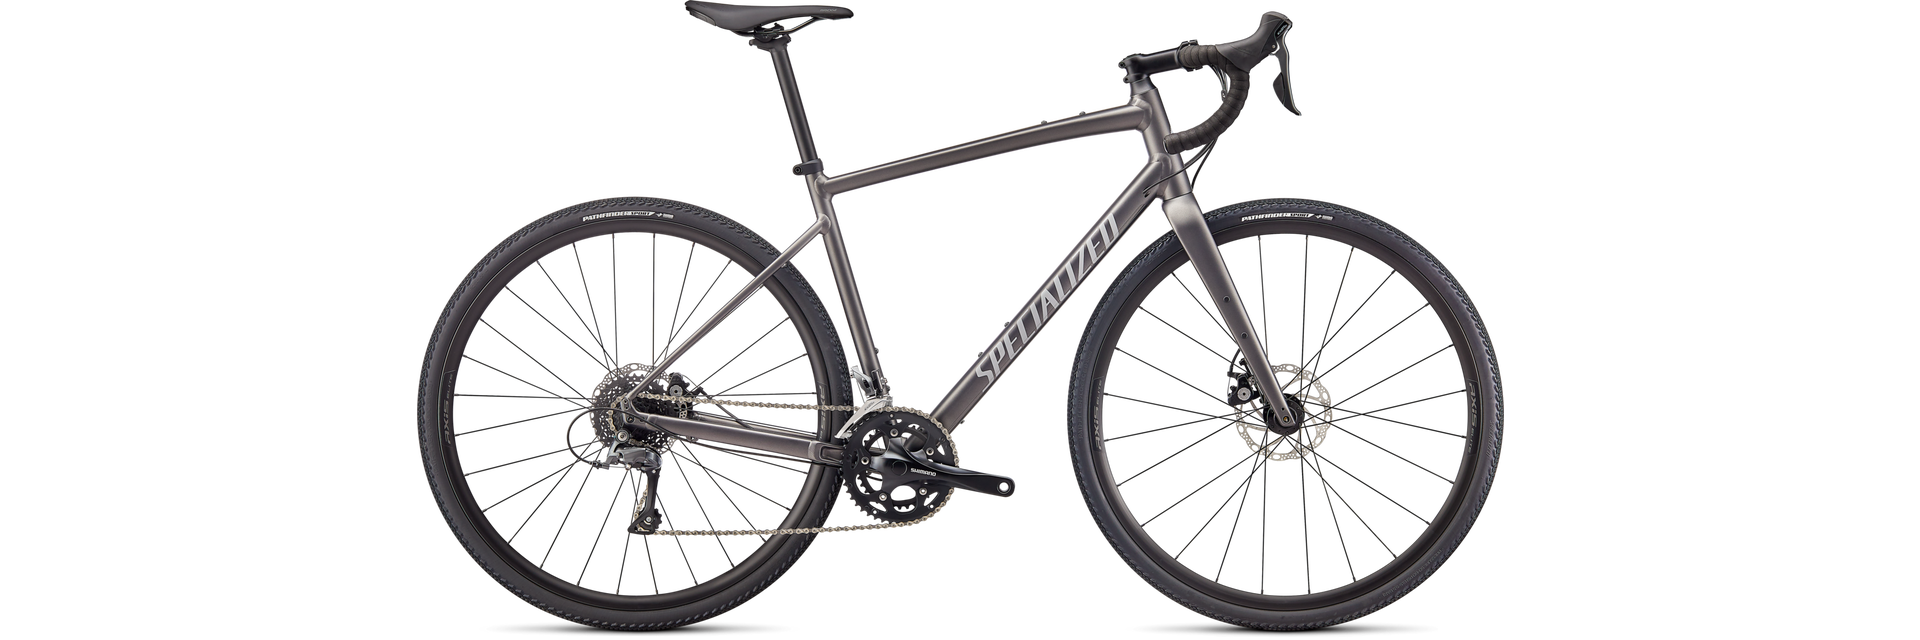 SPECIALIZED Diverge E5 Bike, 52cm Satin Smoke/Cool Grey/Chrome/Clean Smk/clgry/chrm